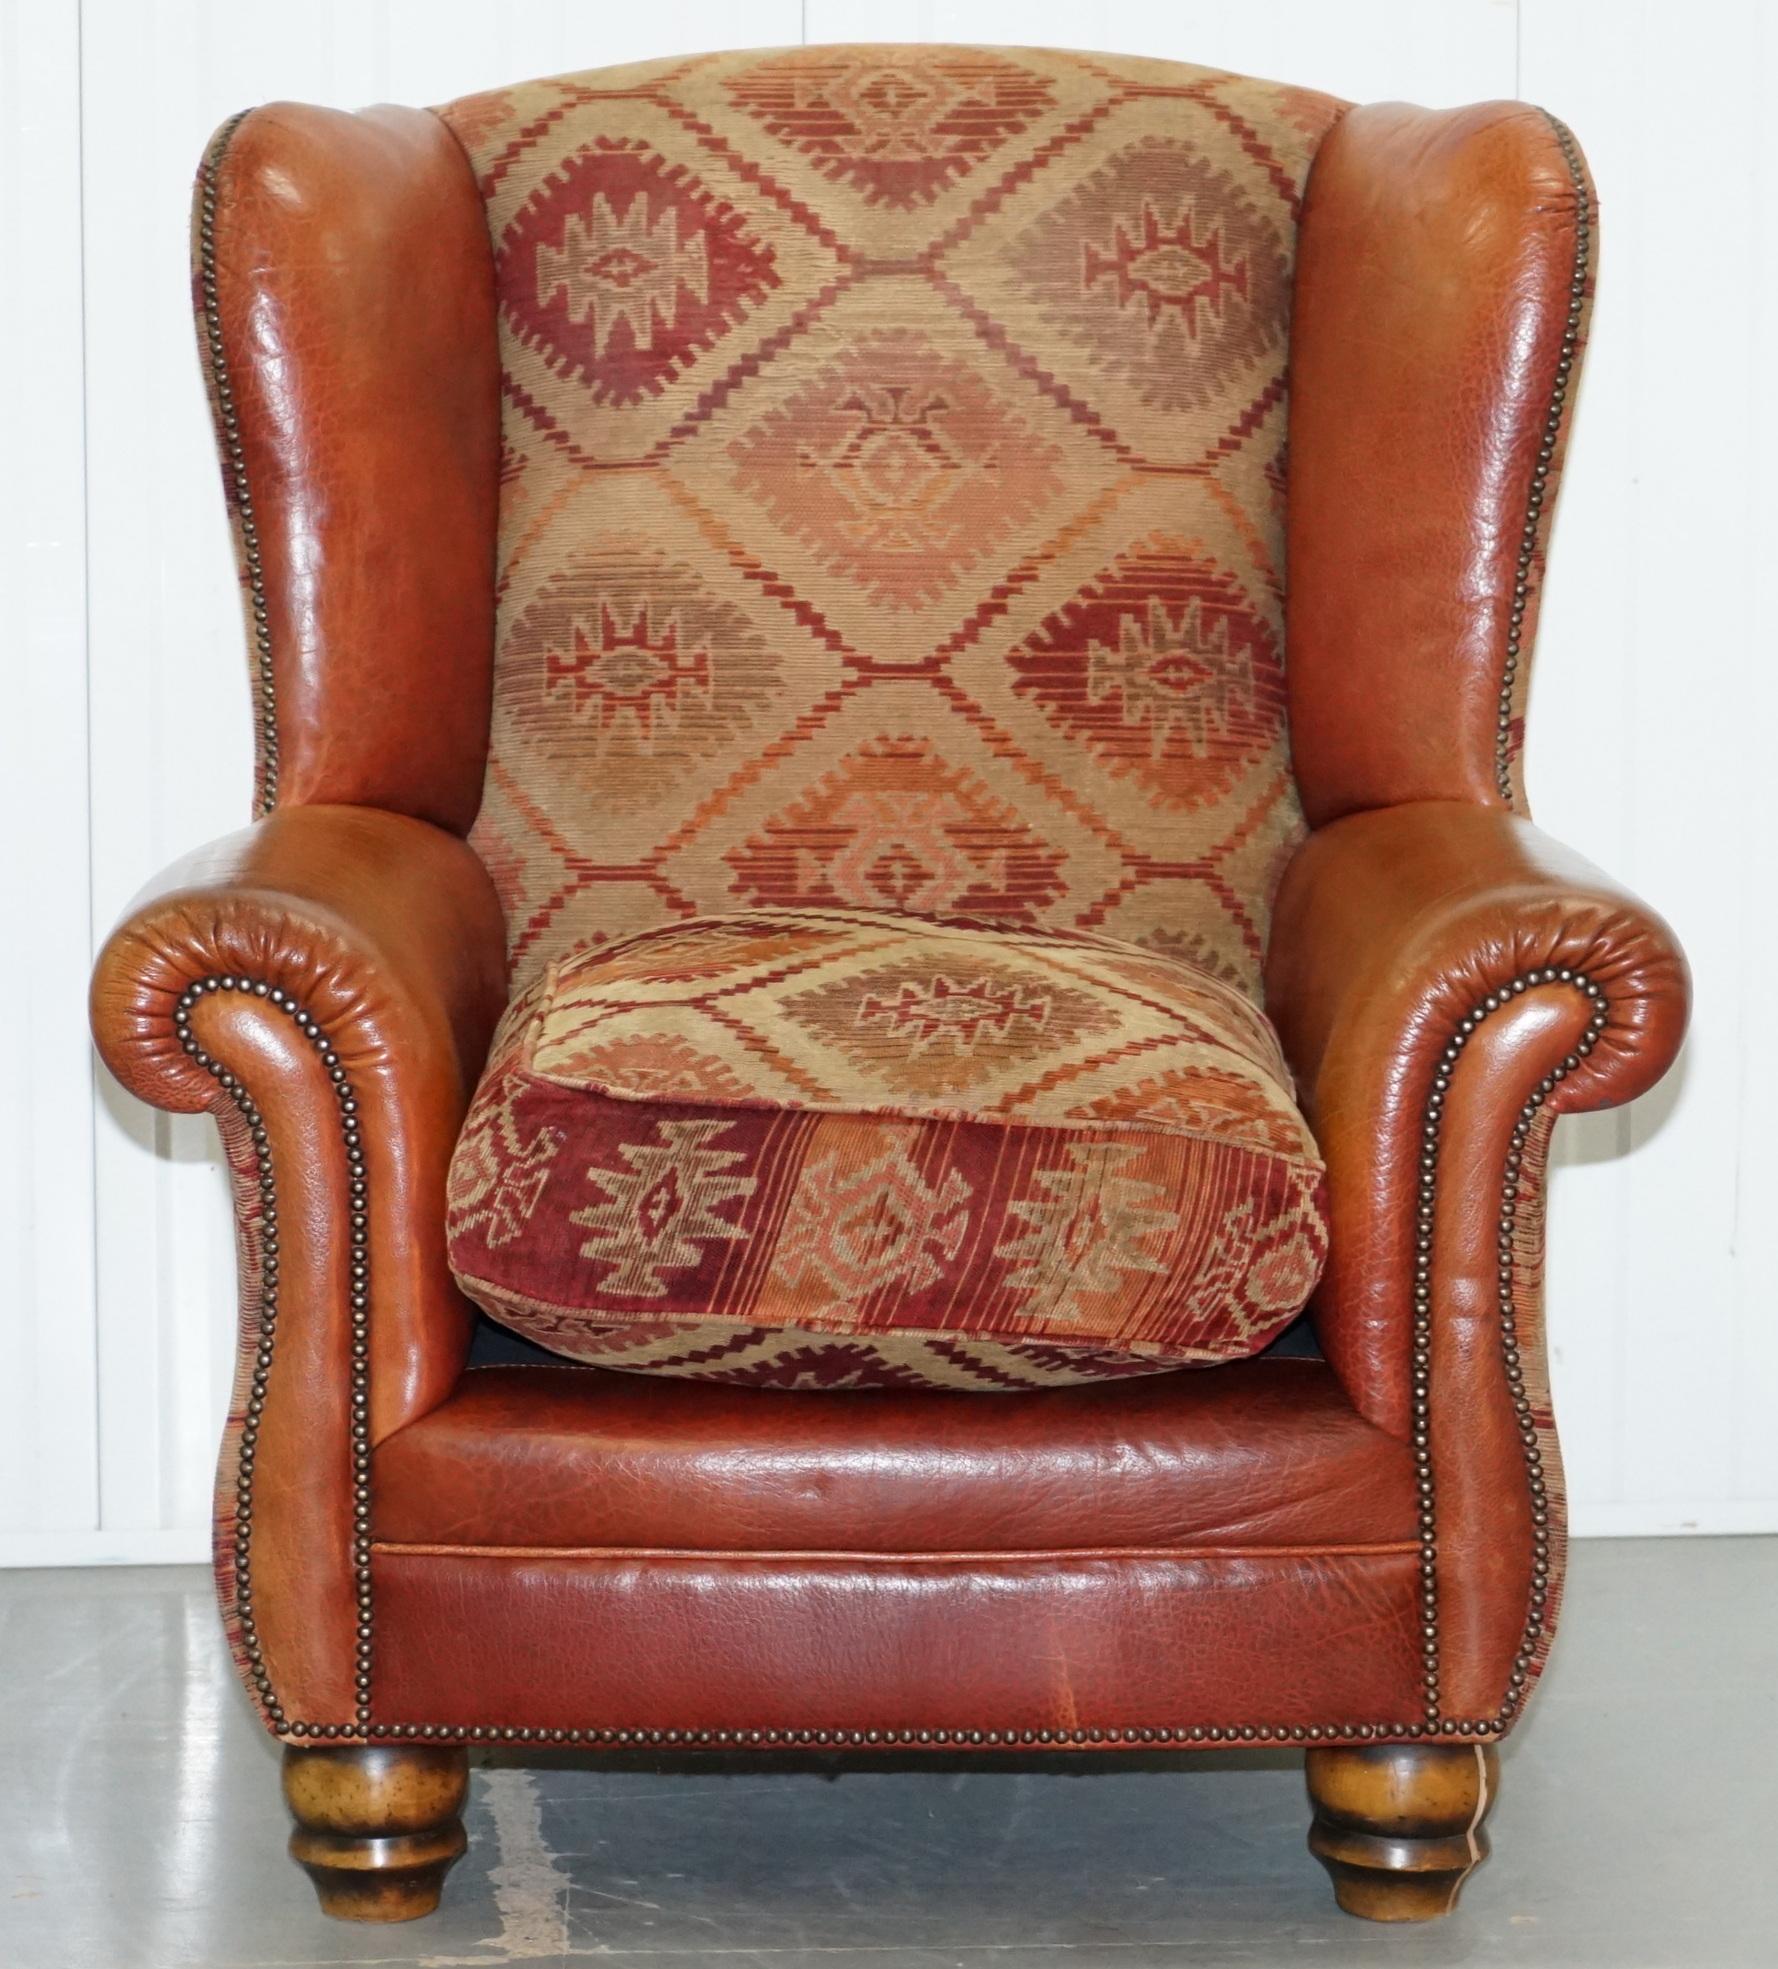 We are delighted to offer for sale this really lovely hand made in England Tetrad Eastwood brown leather armchair with Kilim upholstery RRP £1696.

The chair has a thick feather filled cushion, buffalo leather upholstery, the Kilim is thick and